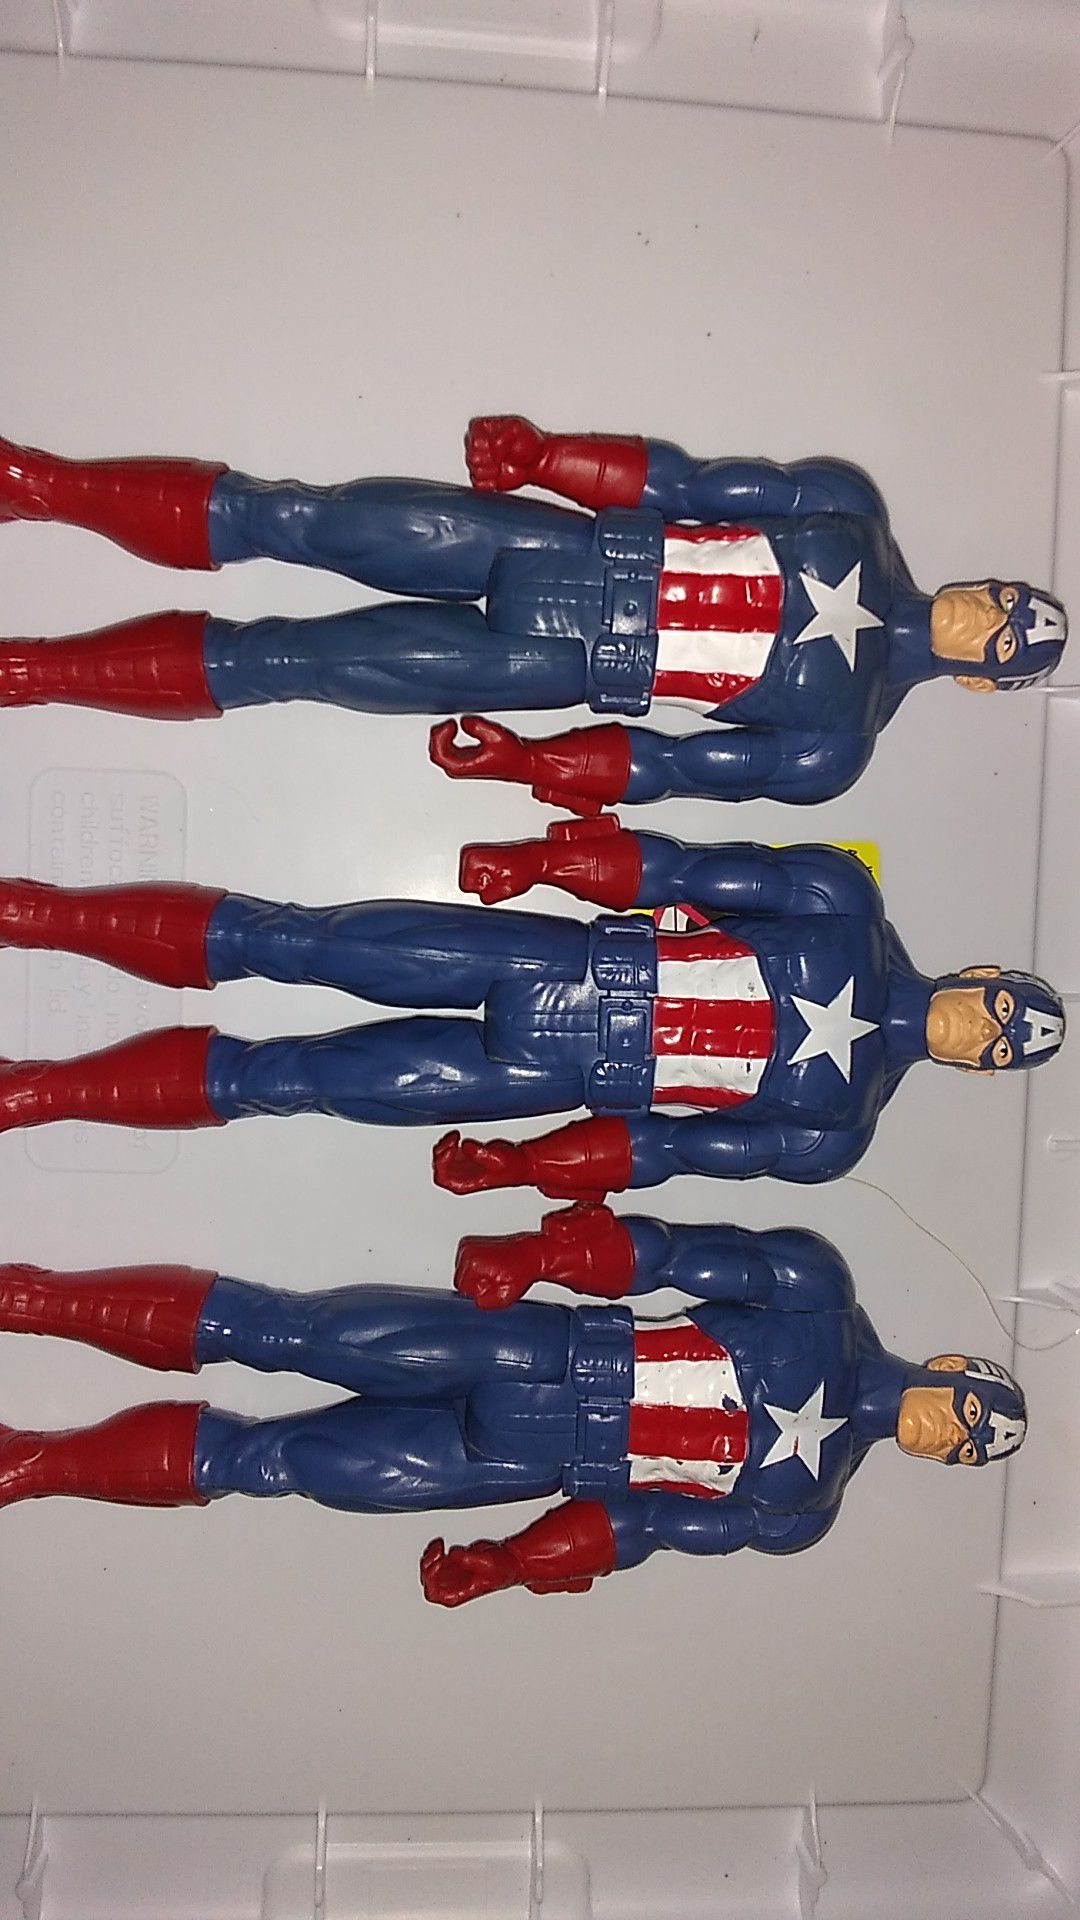 Marvel Captain America Toy Bundle $10 For All.